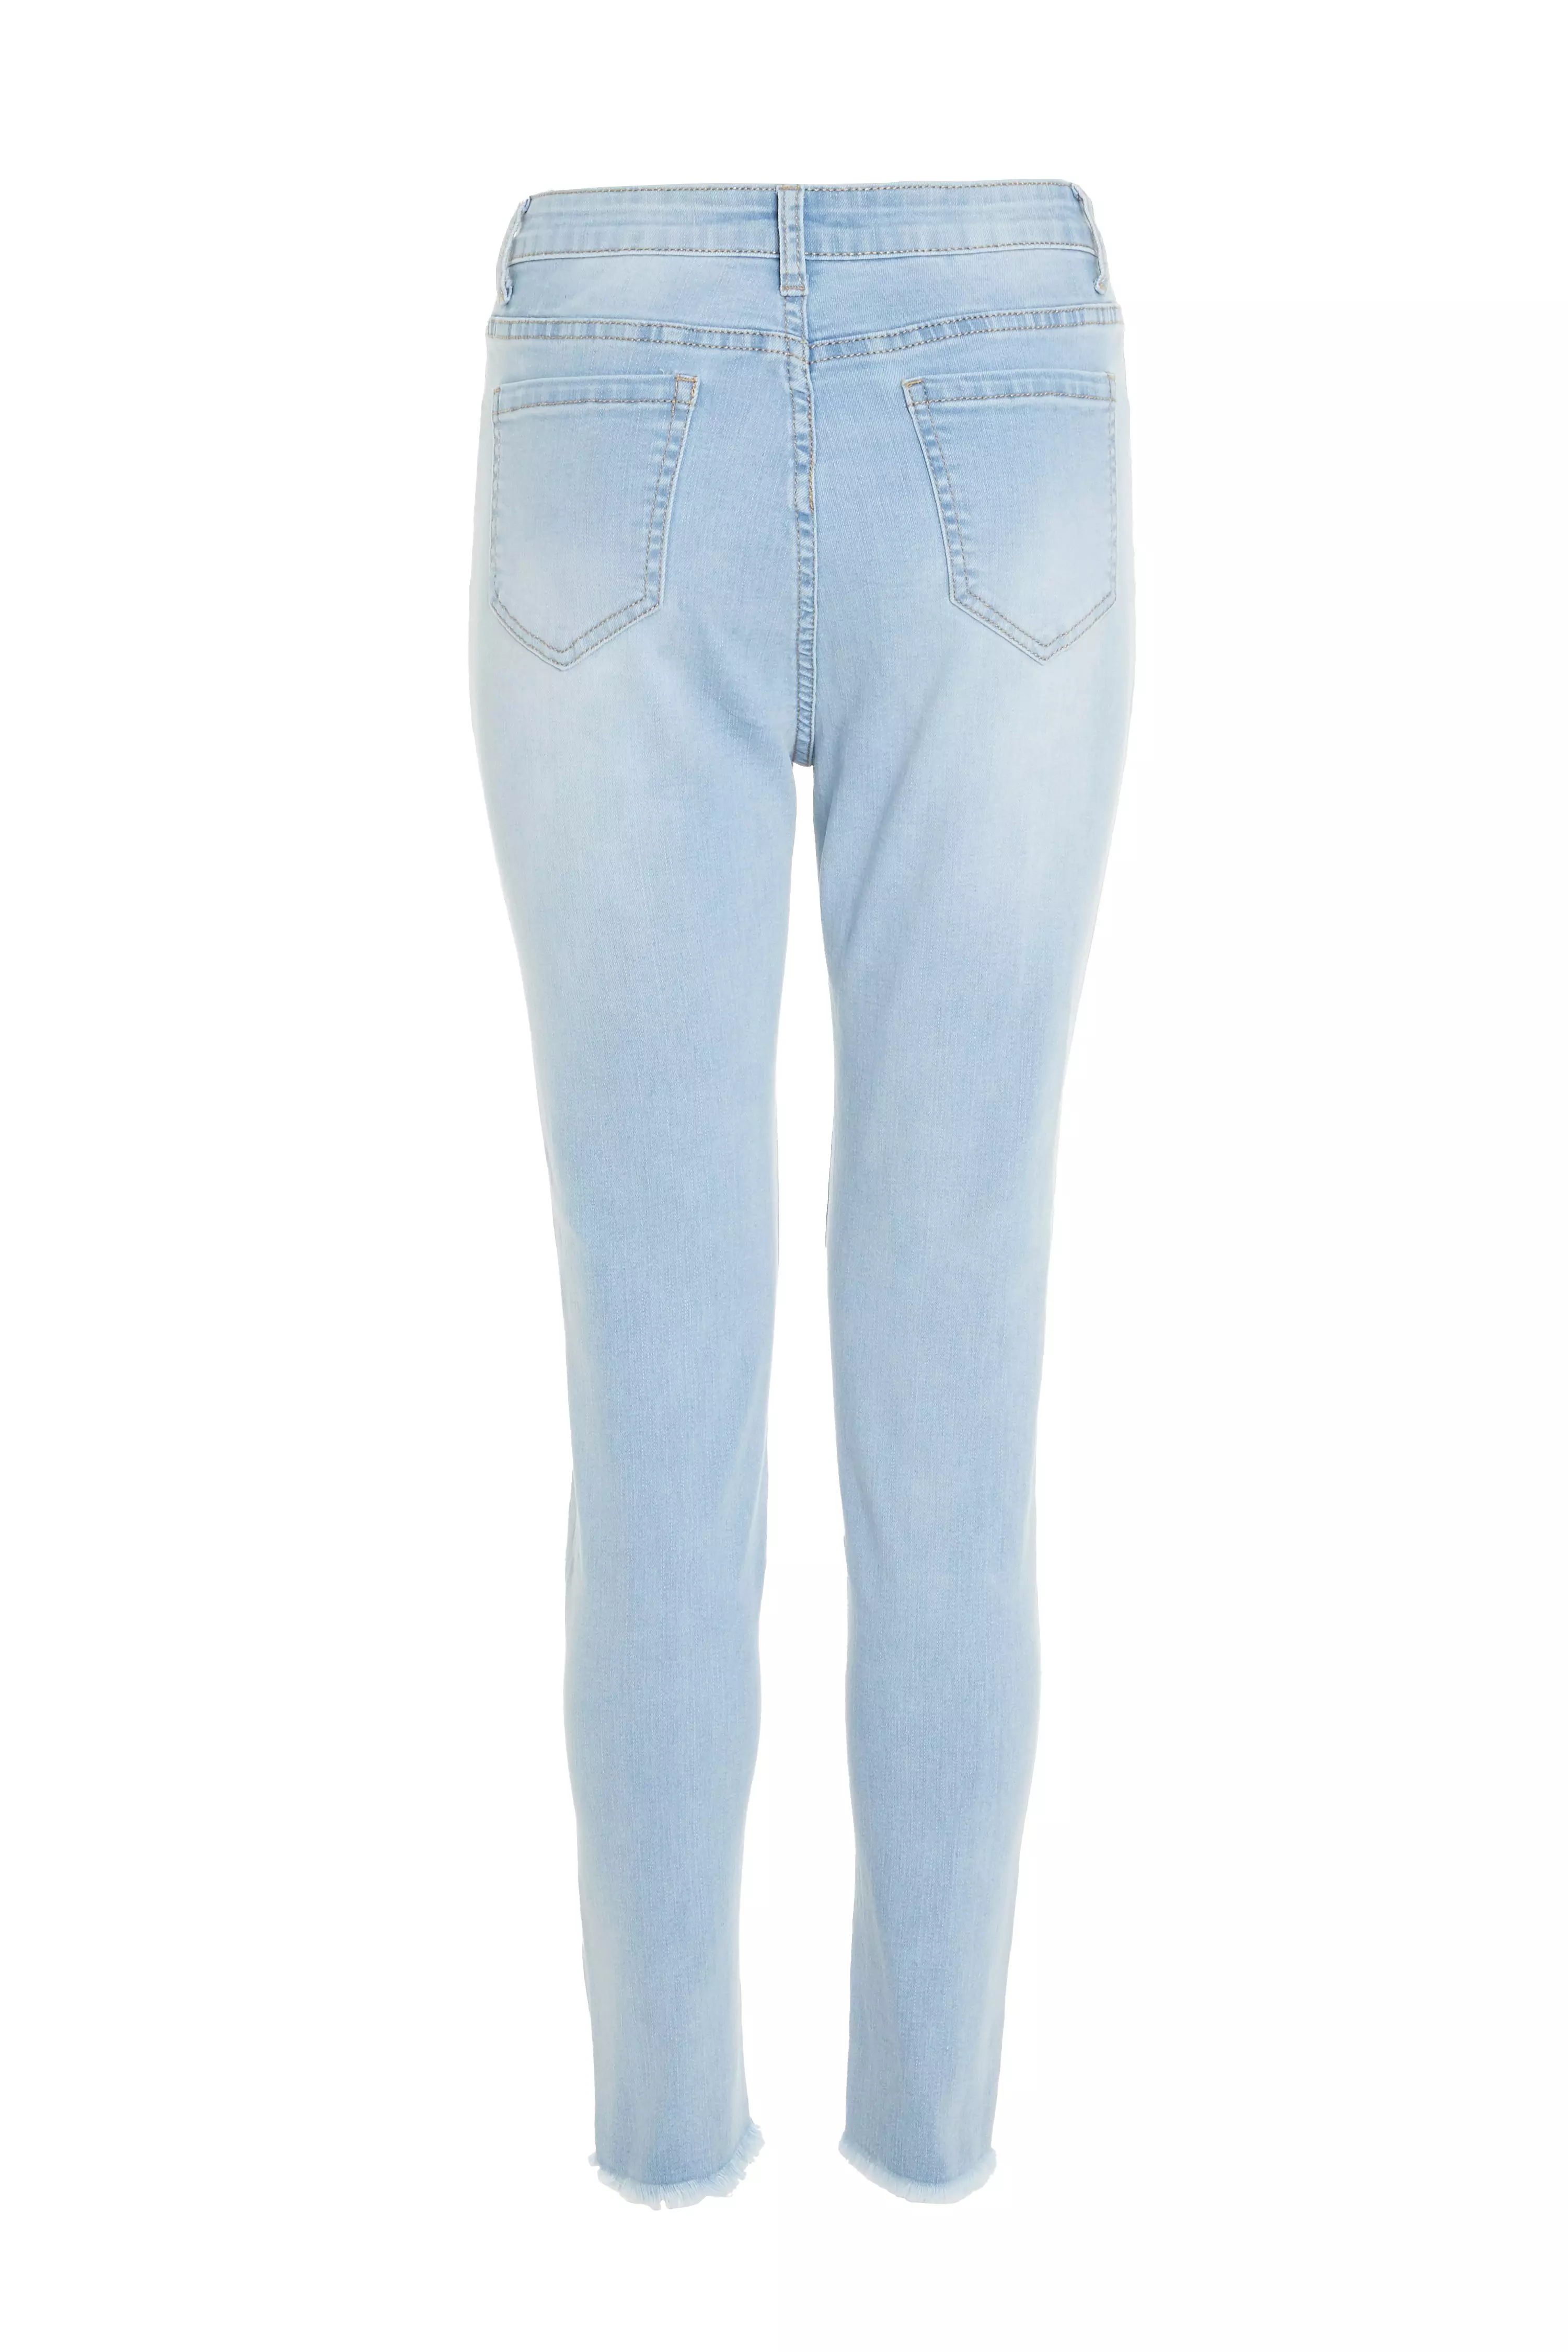 Blue Denim Extreme Ripped Skinny Jeans - QUIZ Clothing